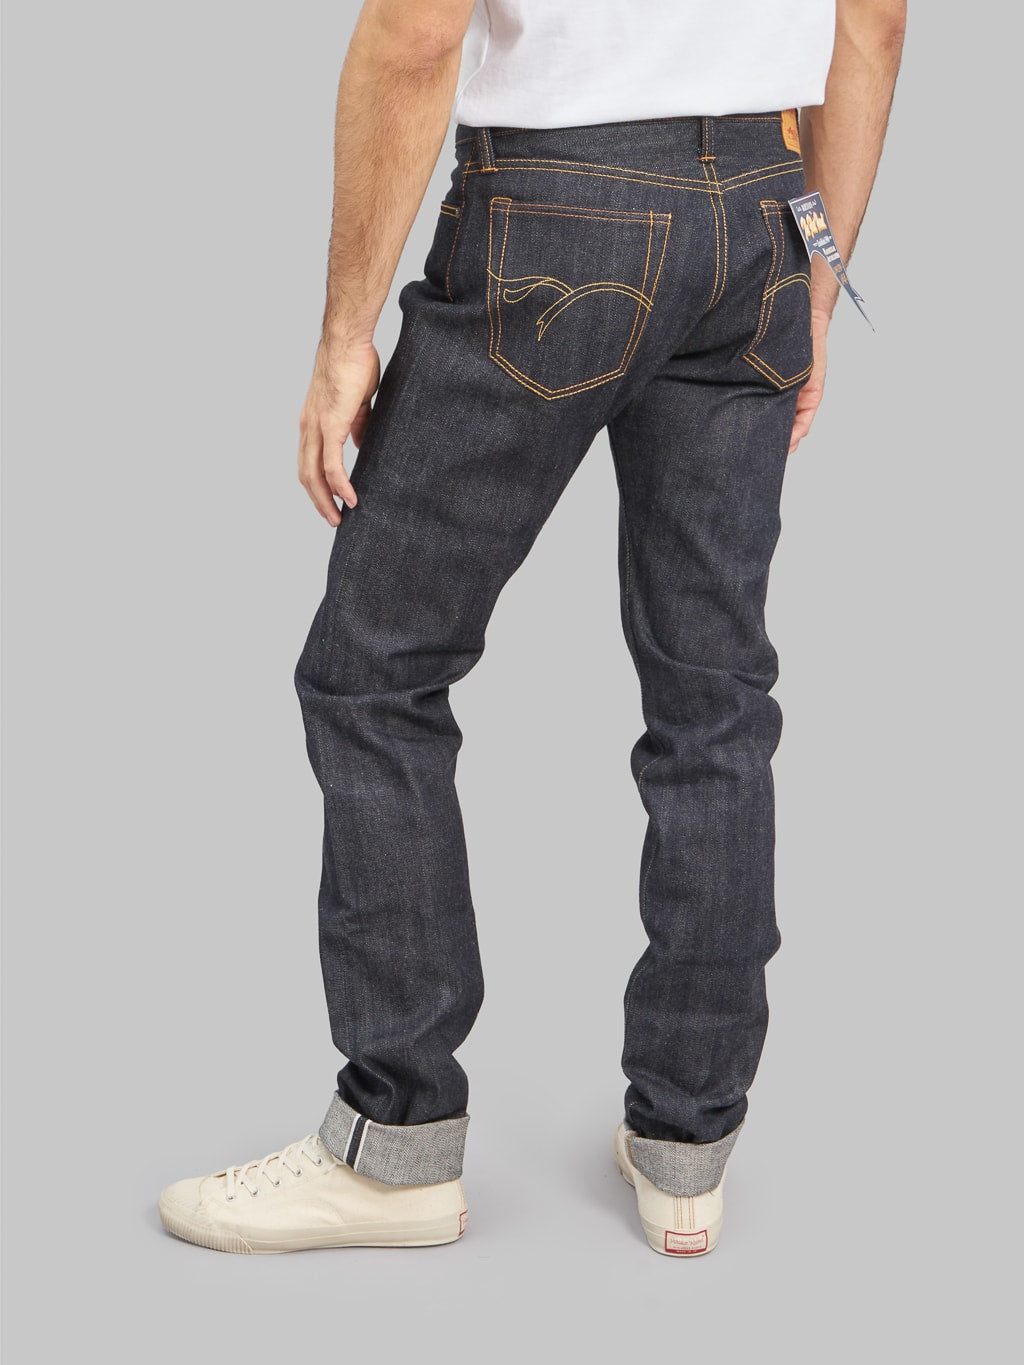 The Flat Head D306 Tight Tapered selvedge Jeans back fit